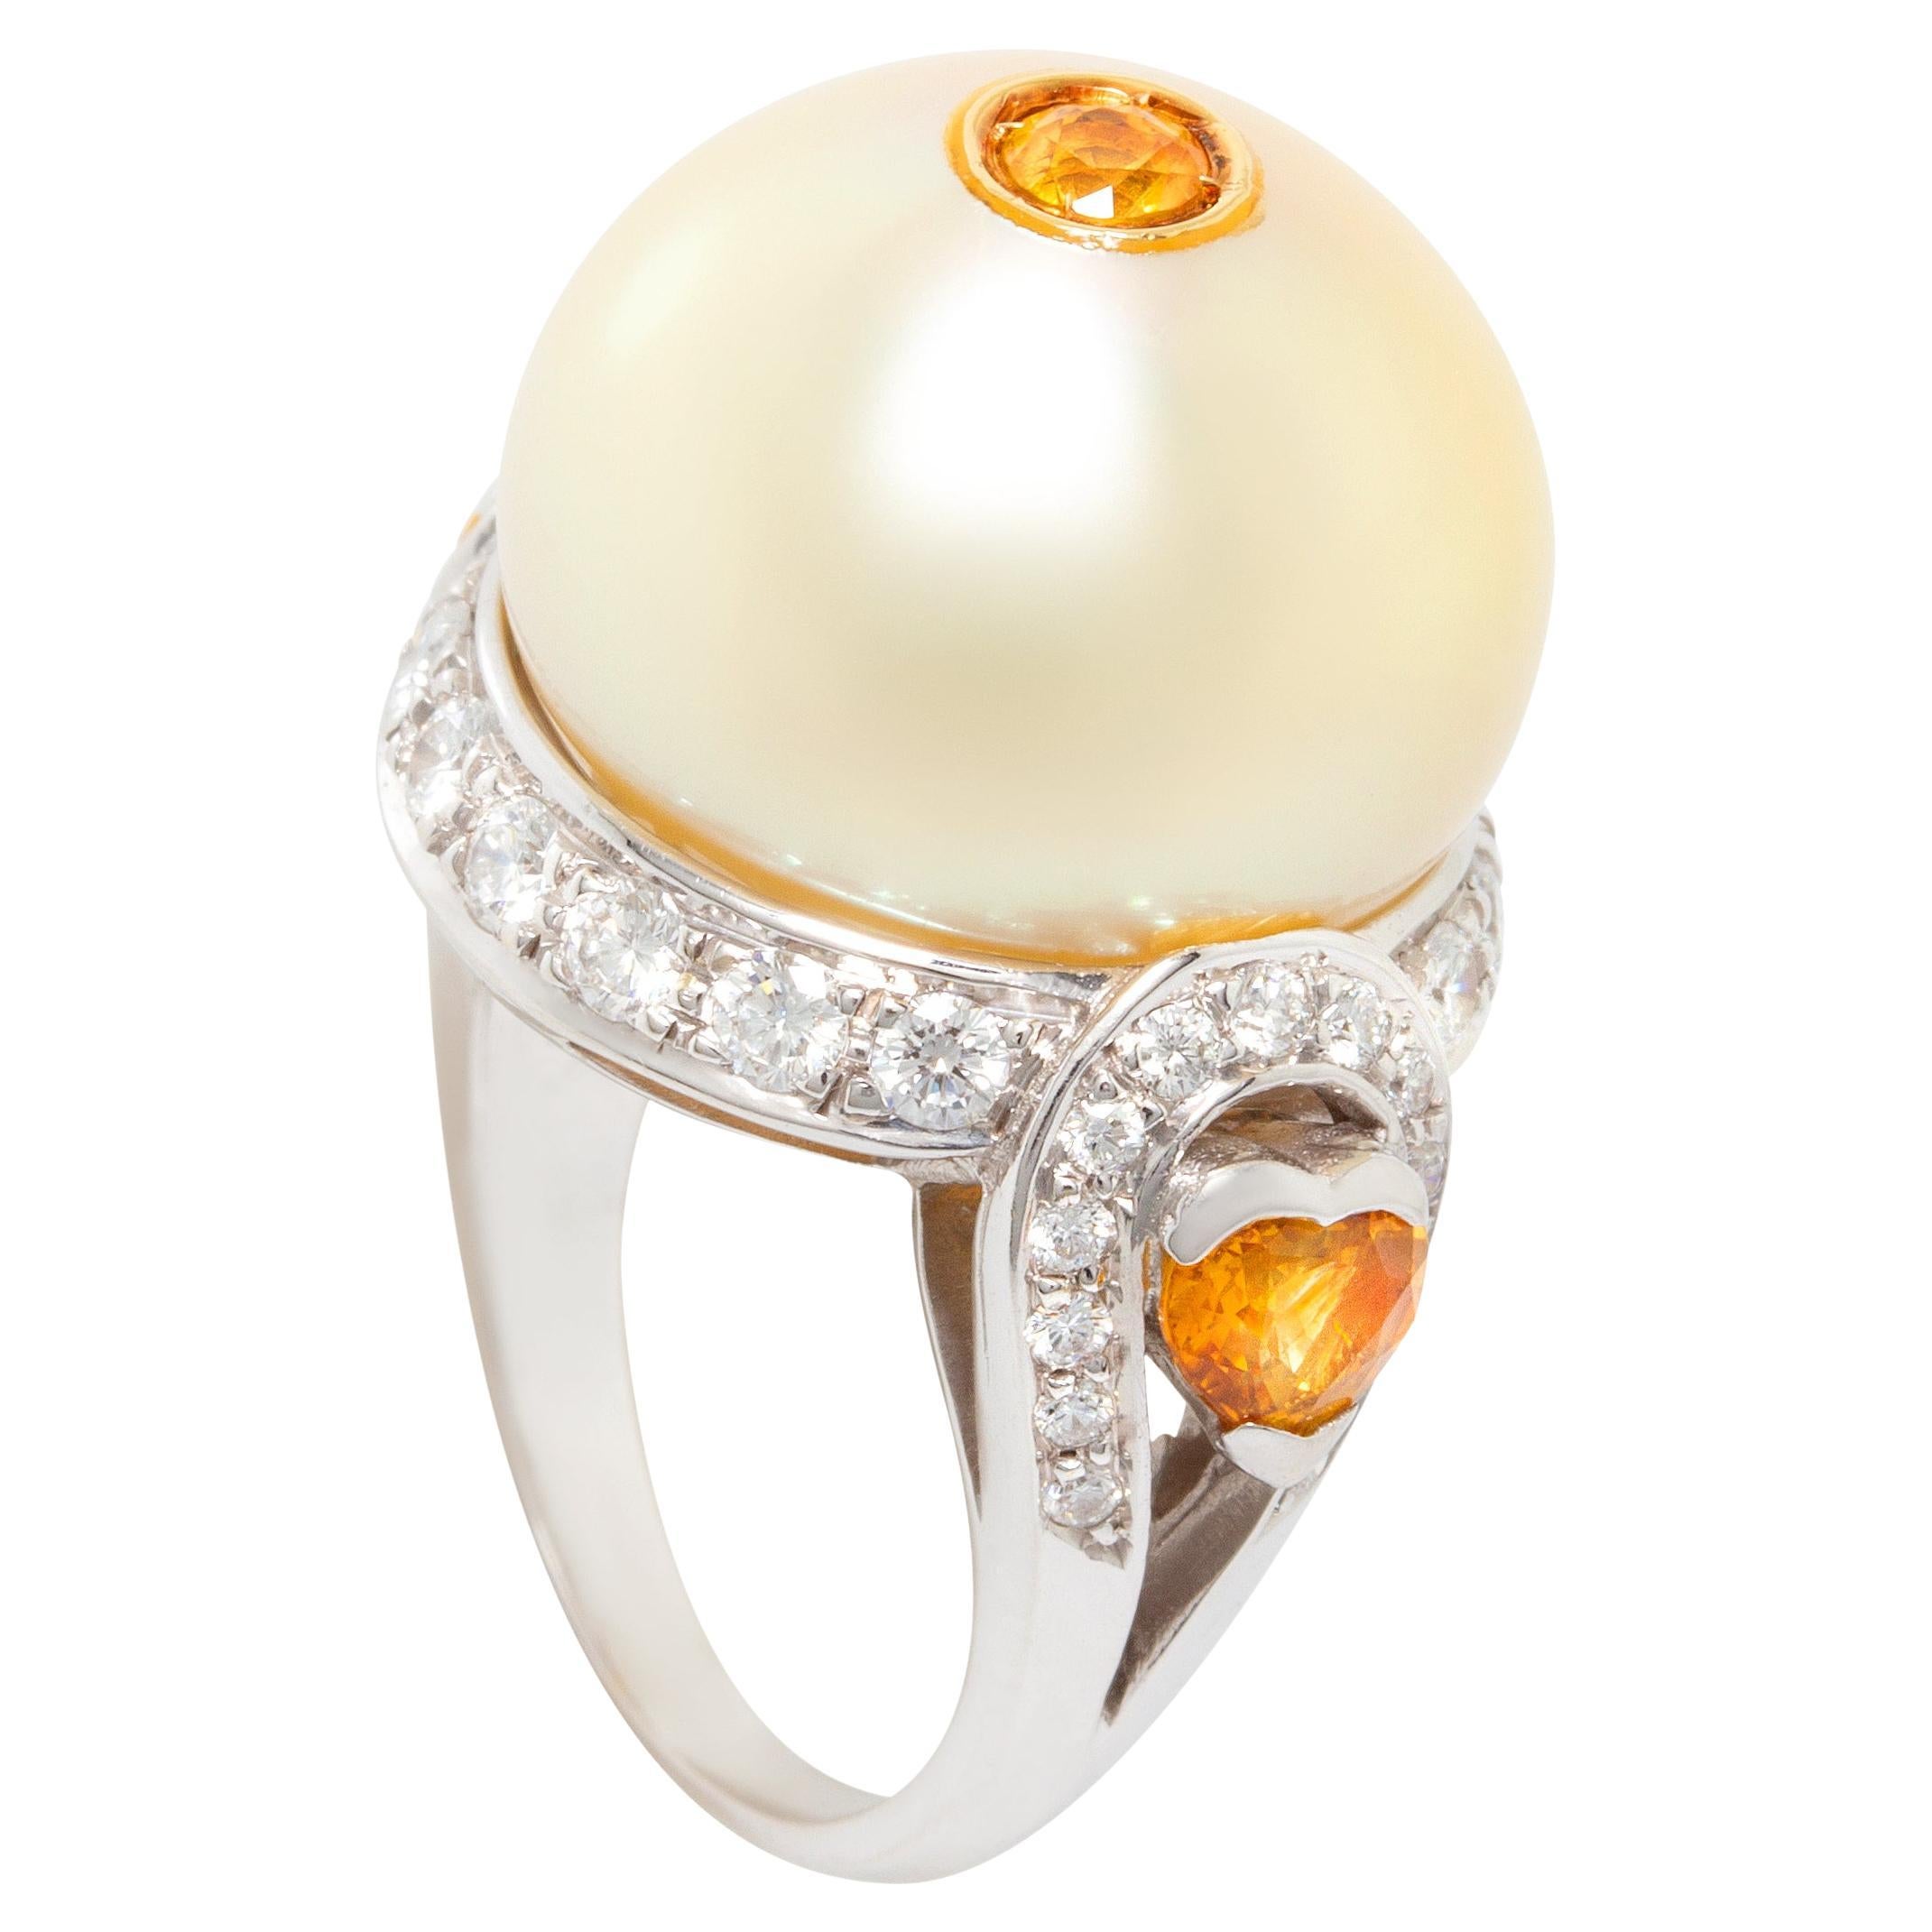 Ella Gafter 16mm Golden Pearl Diamond Sapphire Ring  For Sale